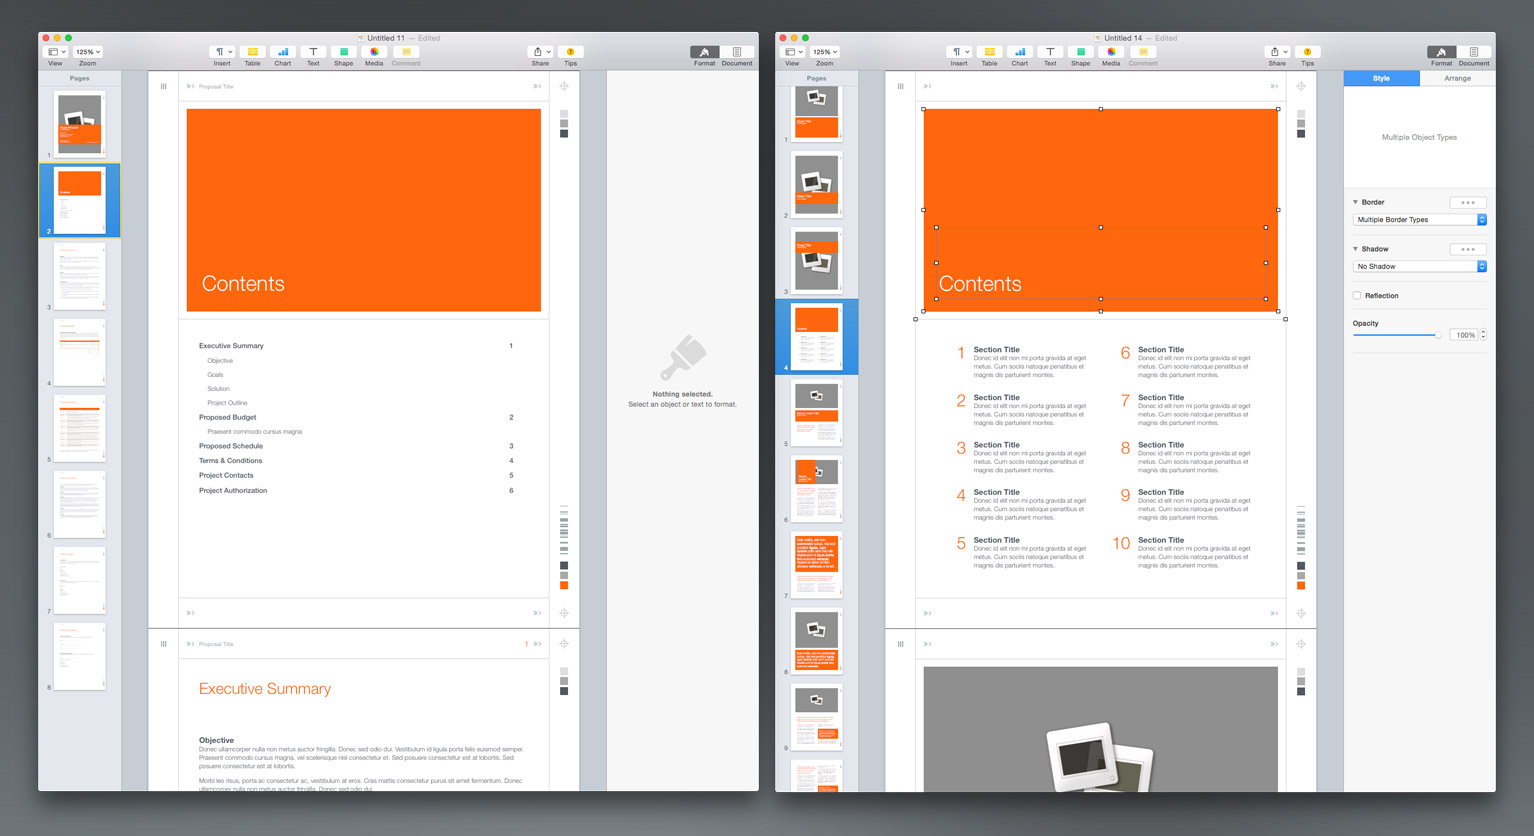 Adjust text-wrap on the divider as desired - hide Invisibles/Layout to preview.